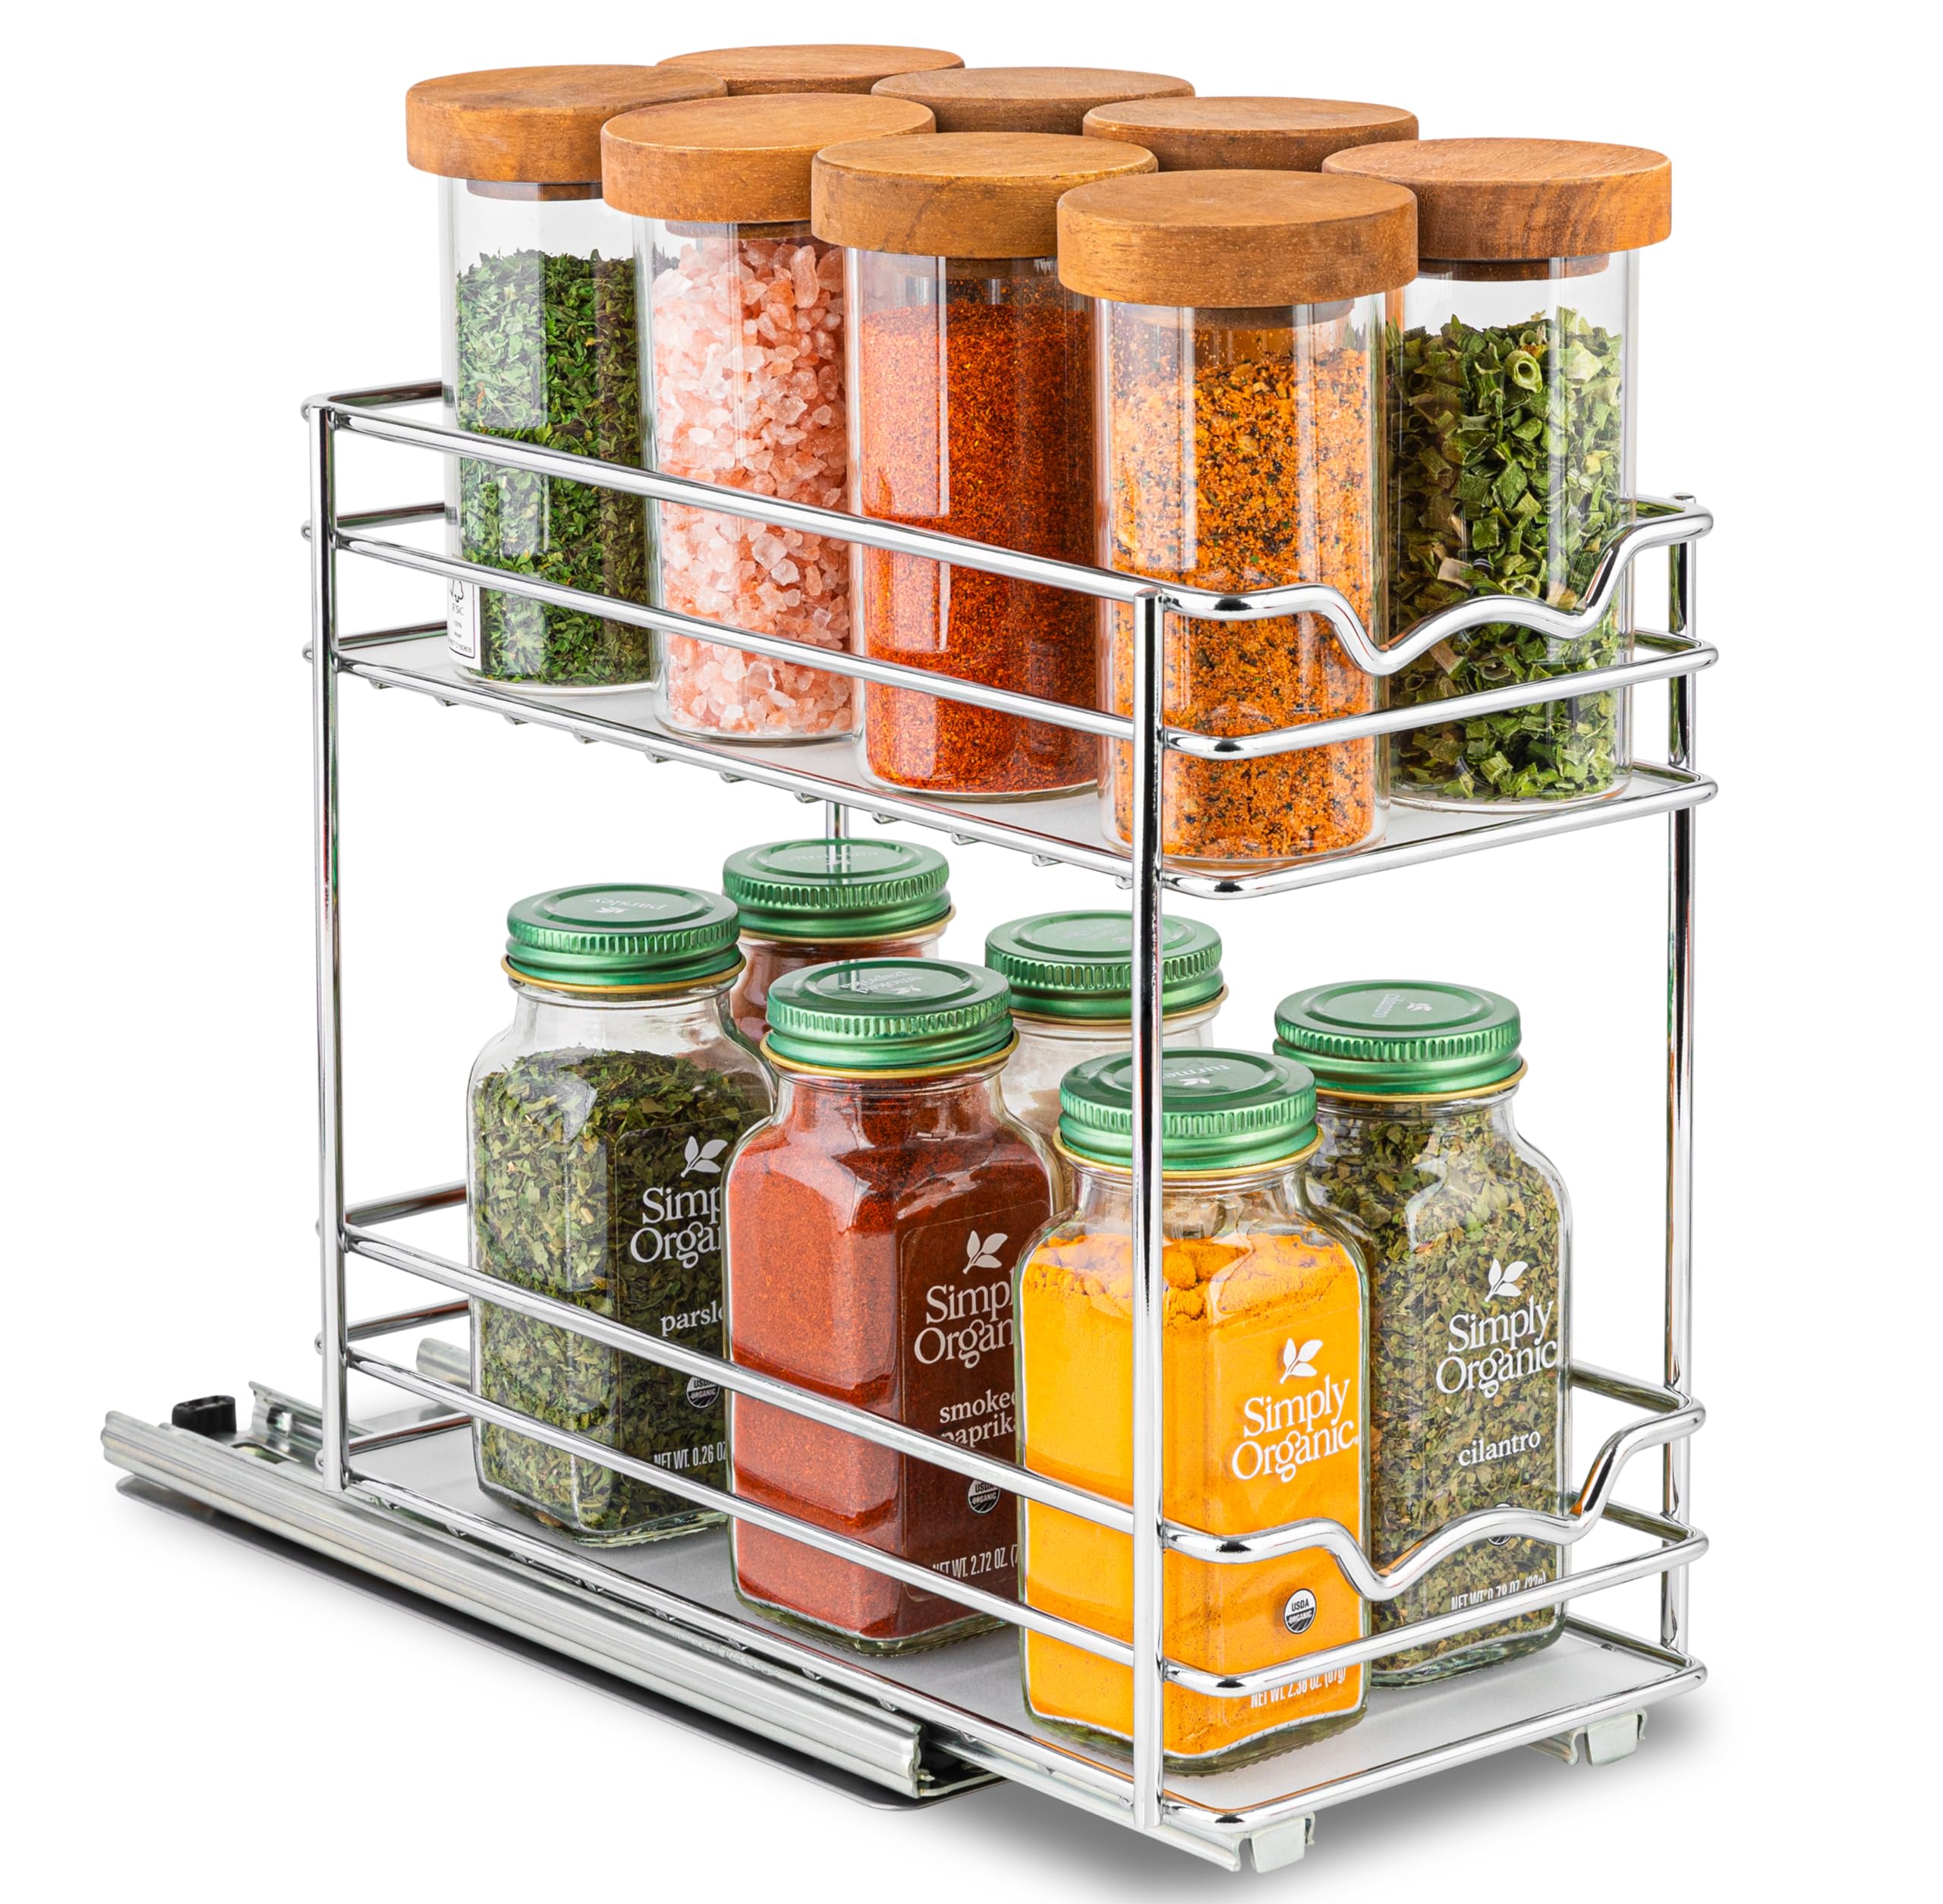 HOLD N' STORAGE Premium Pull-Out Spice Rack - 4.5"W x 10"D - Anti-Rust Chrome Finish - Heavy Duty with 5-Year Limited Warranty- Fits 2 Rows of Standard Spice Jars  - Like New